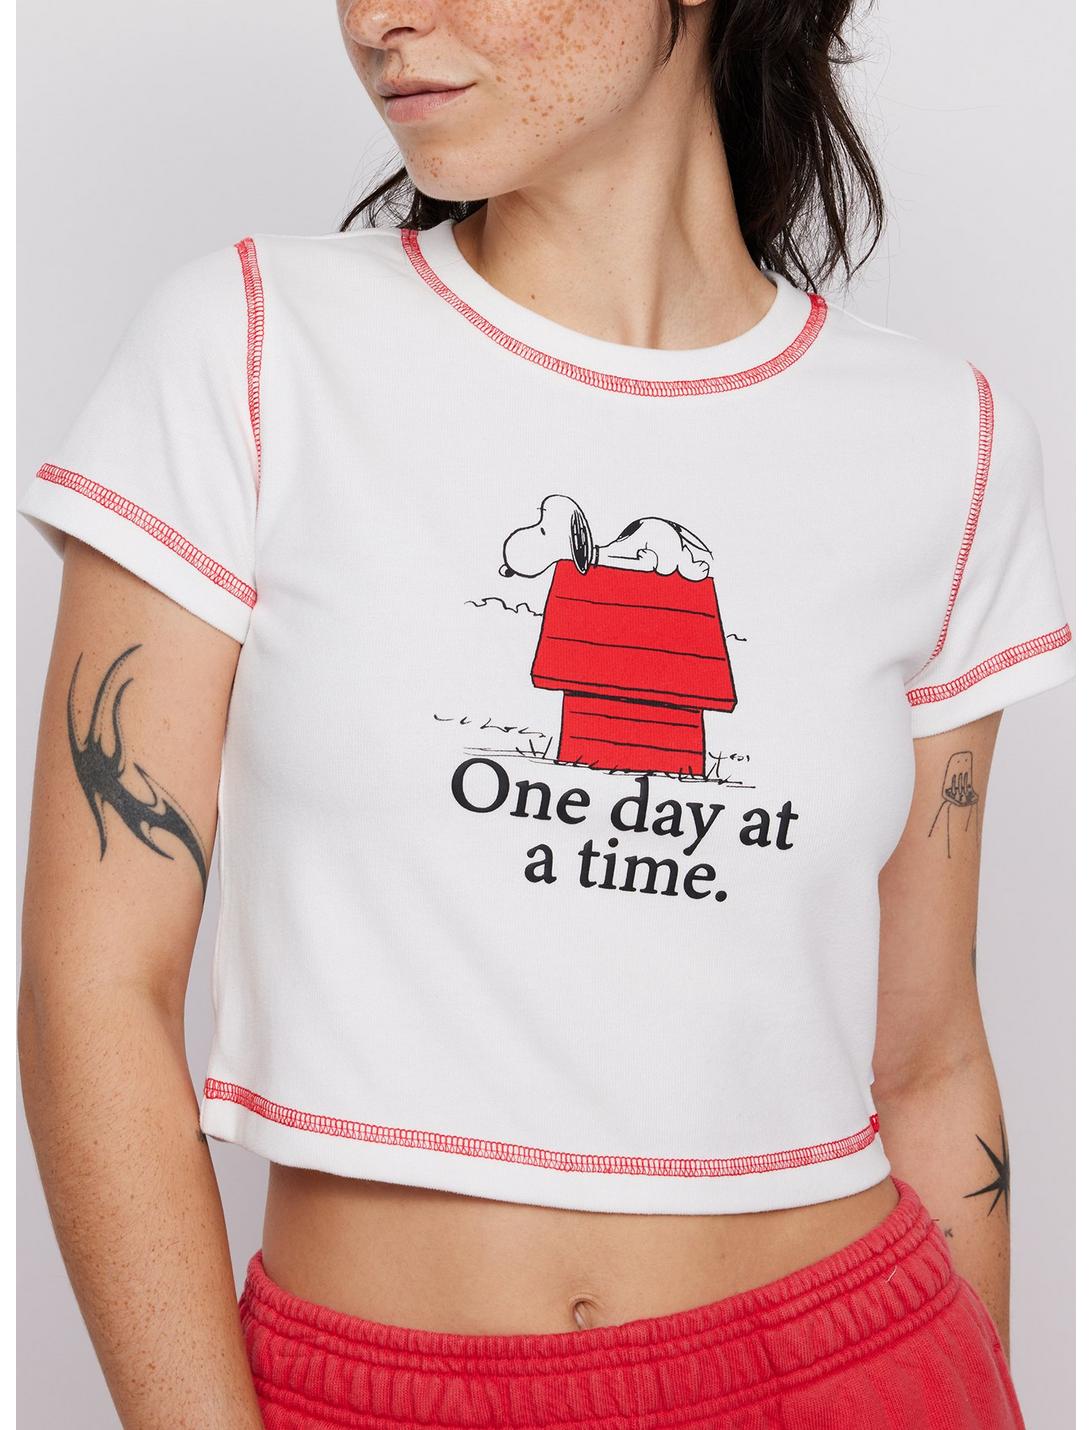 Samii Ryan Peanuts Snoopy Doghouse Women's Cropped T-Shirt, , hi-res